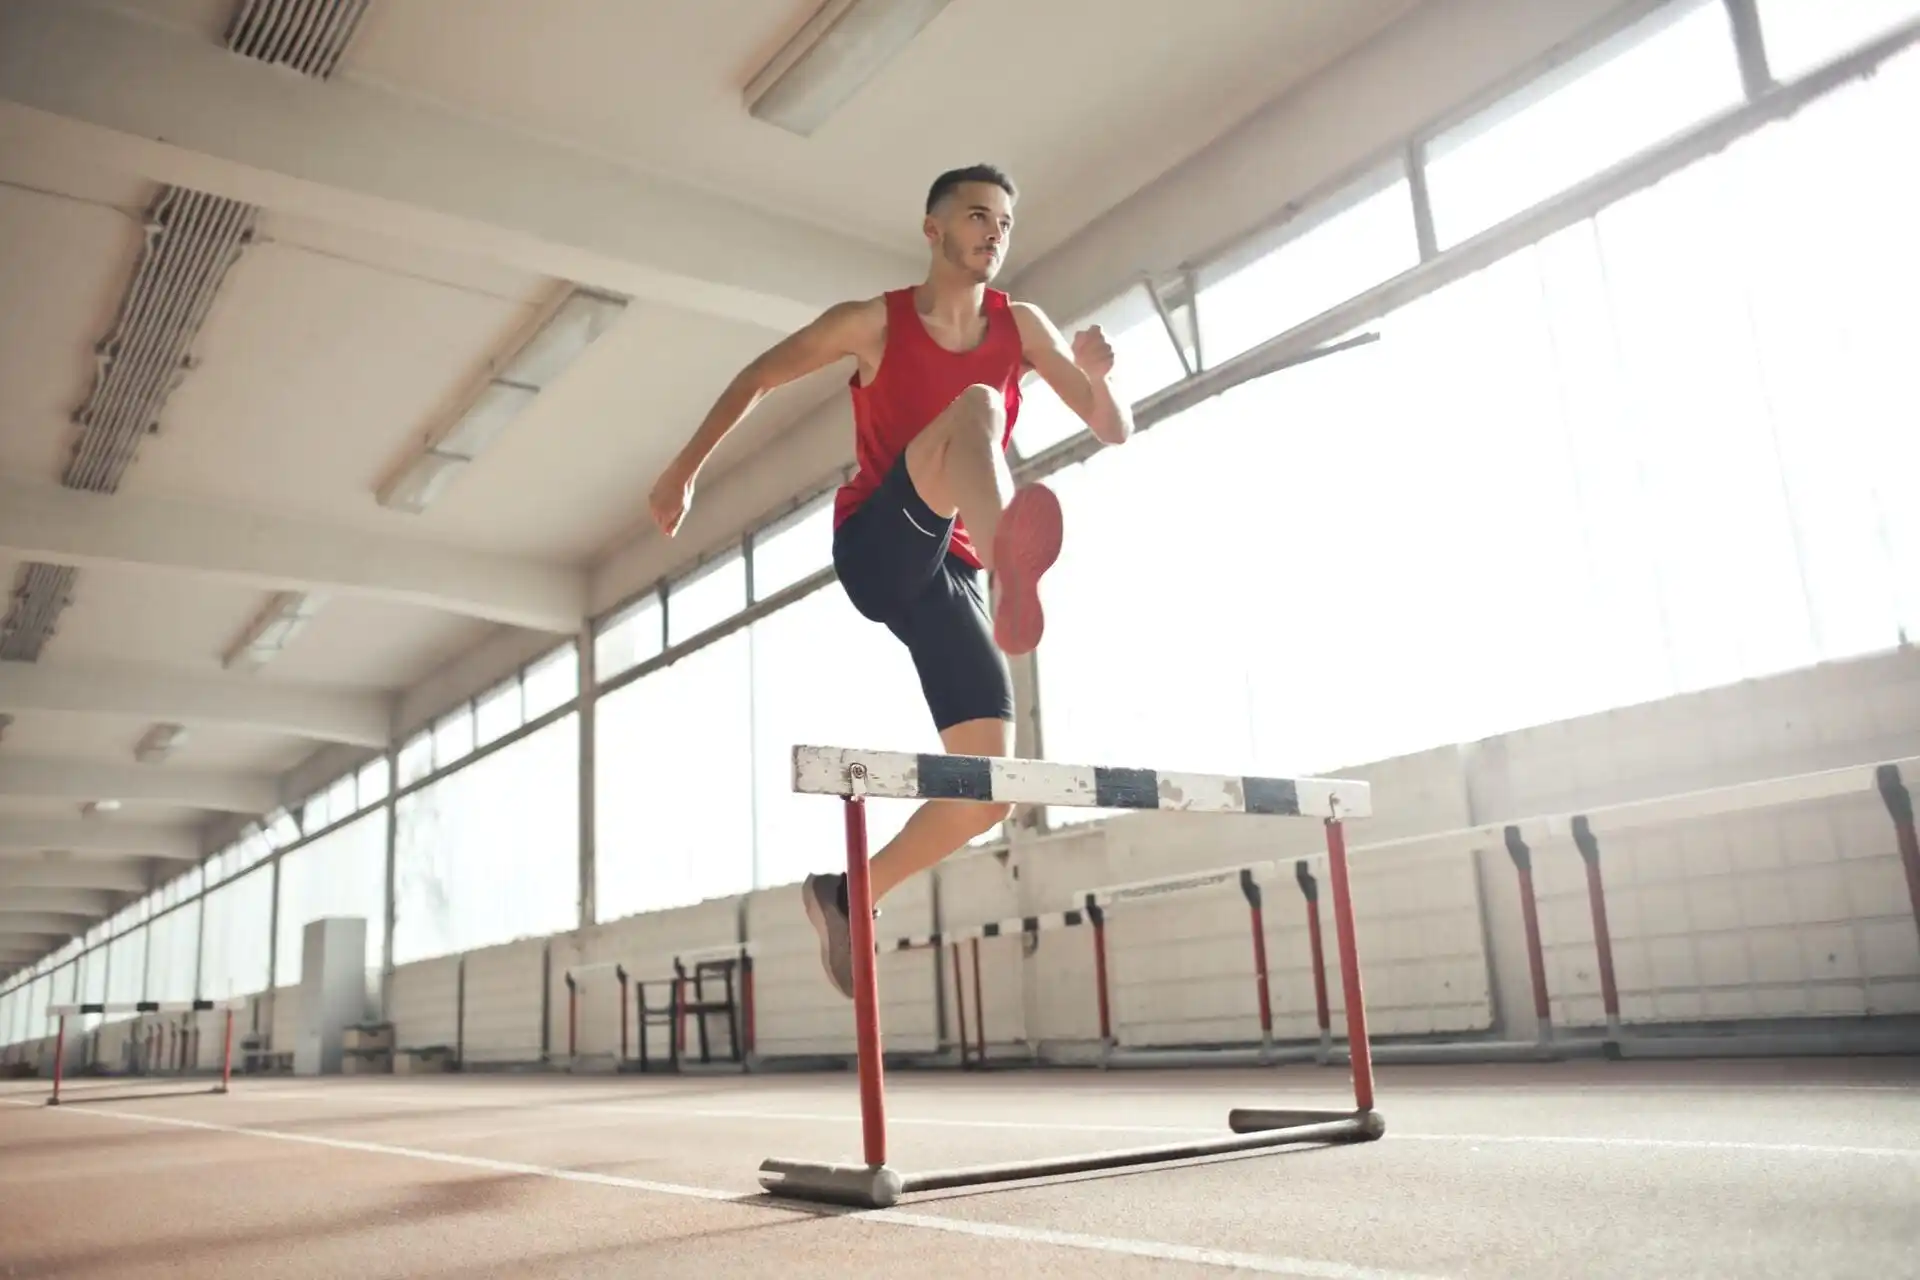 A man jumping over a hurdle in an indoor track.